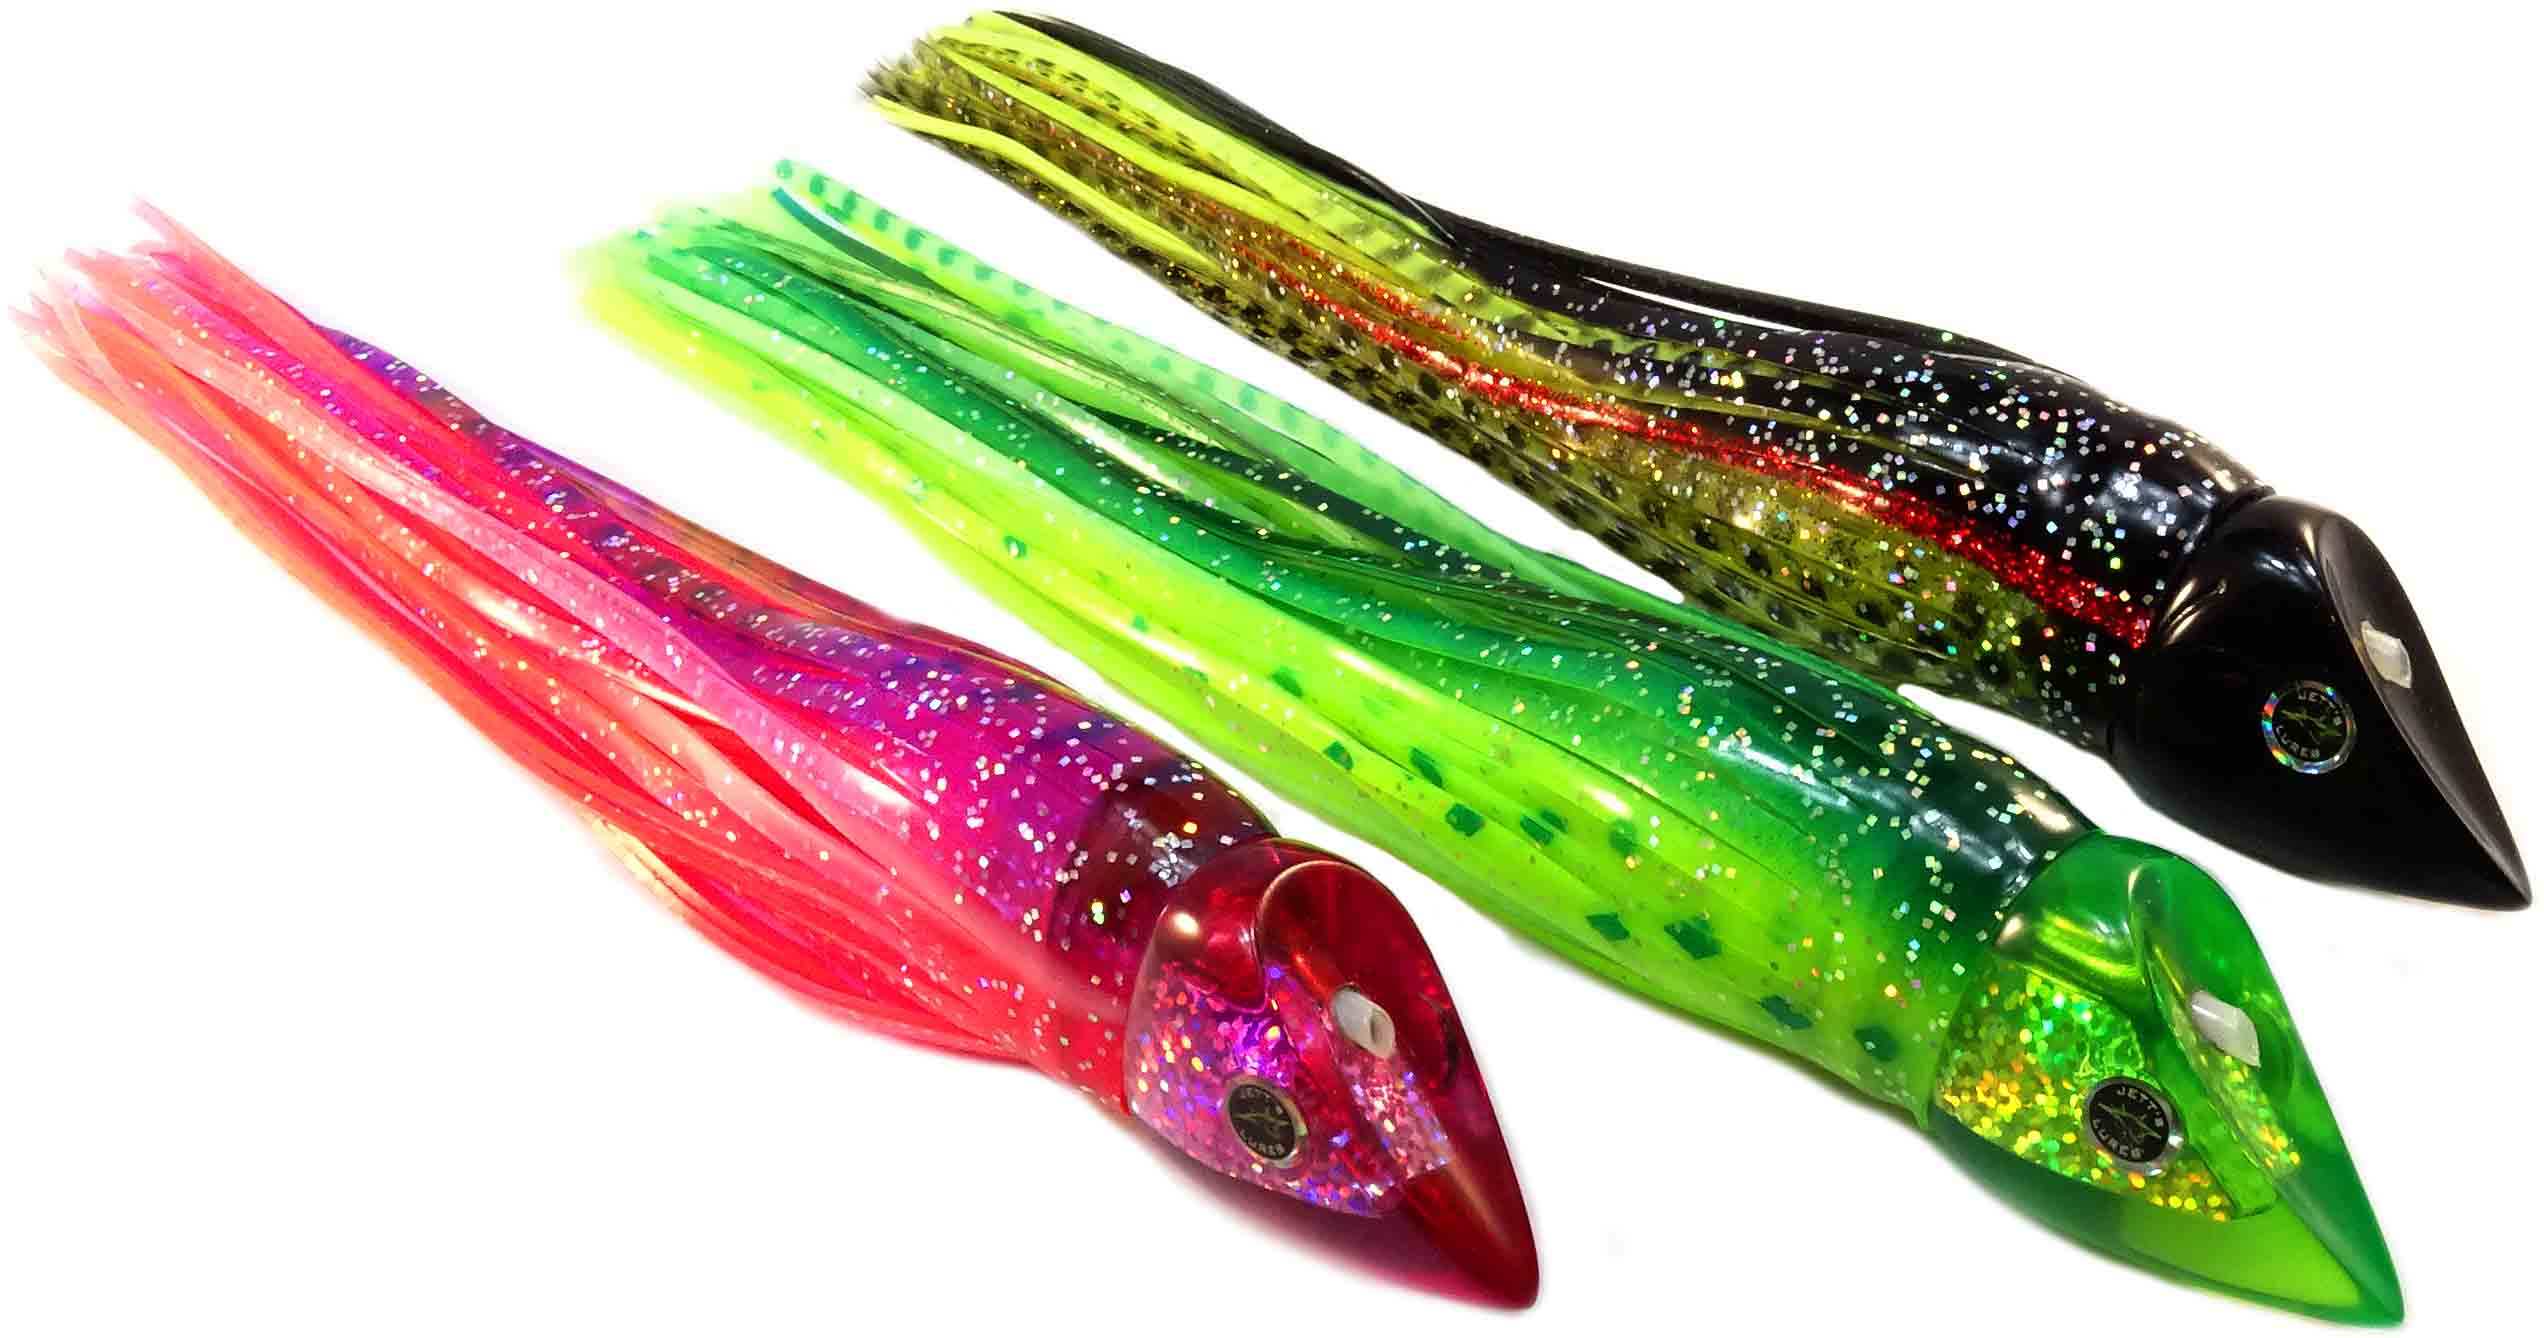 Jetts Lures - Wedgie Series - Collection